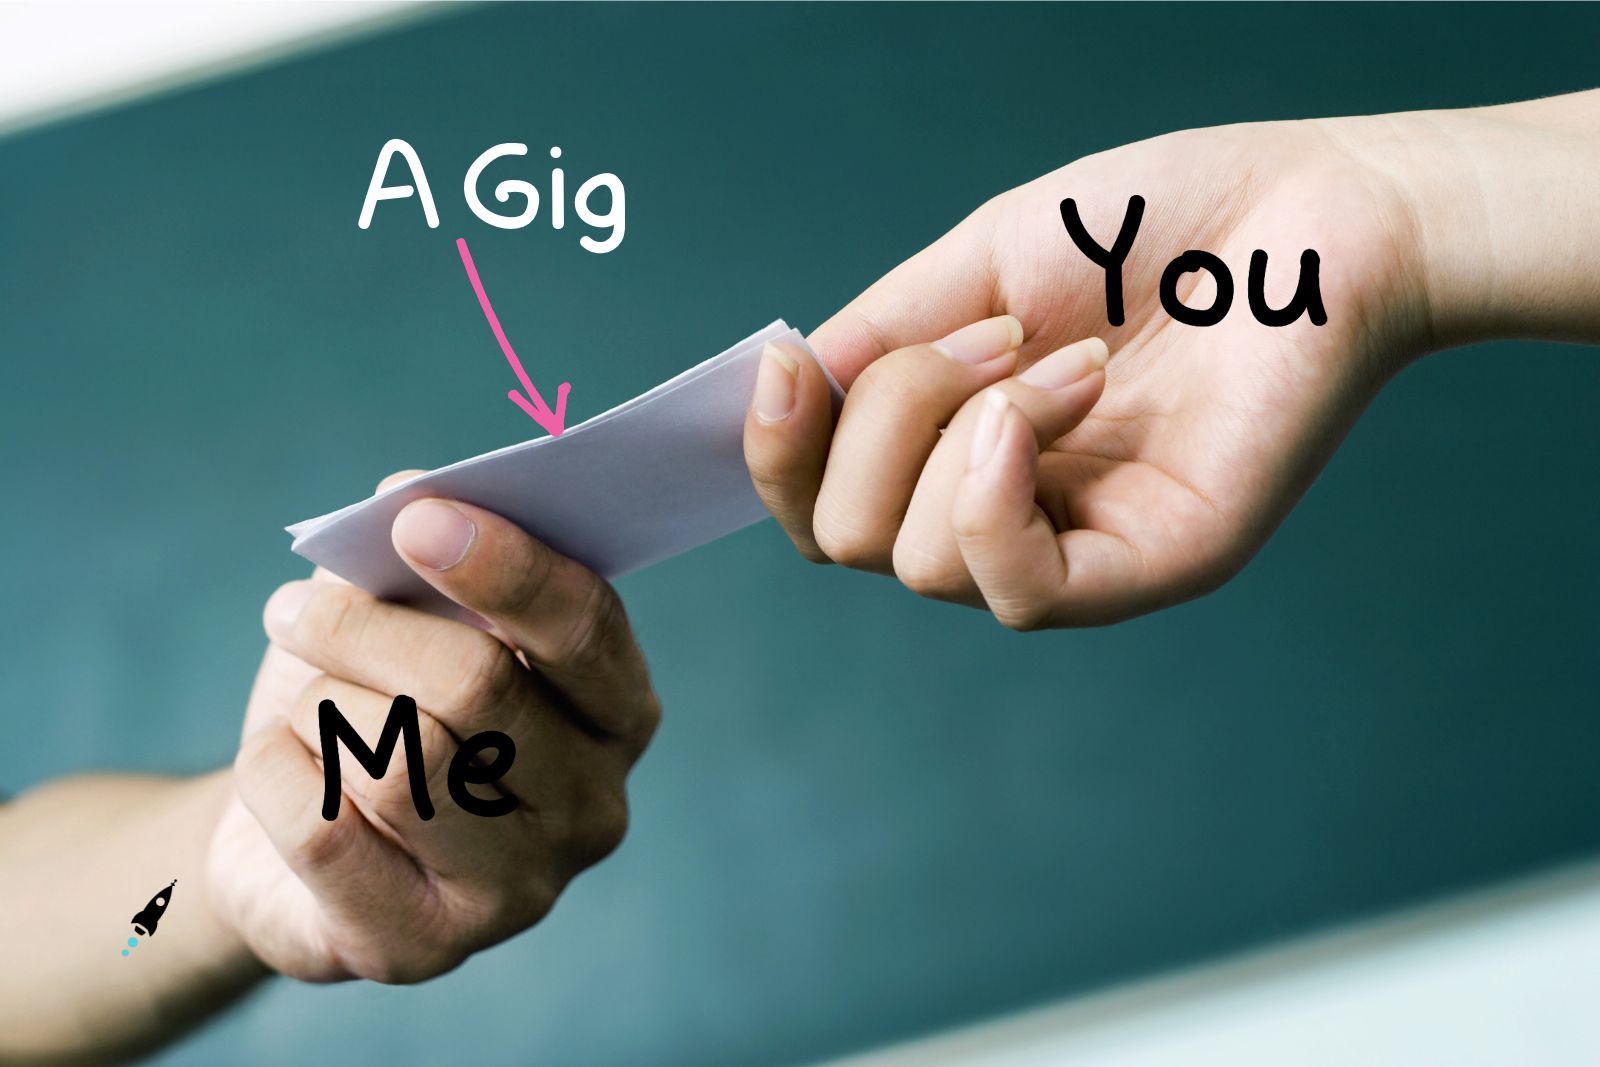 How the Gigs Referral Engine Works